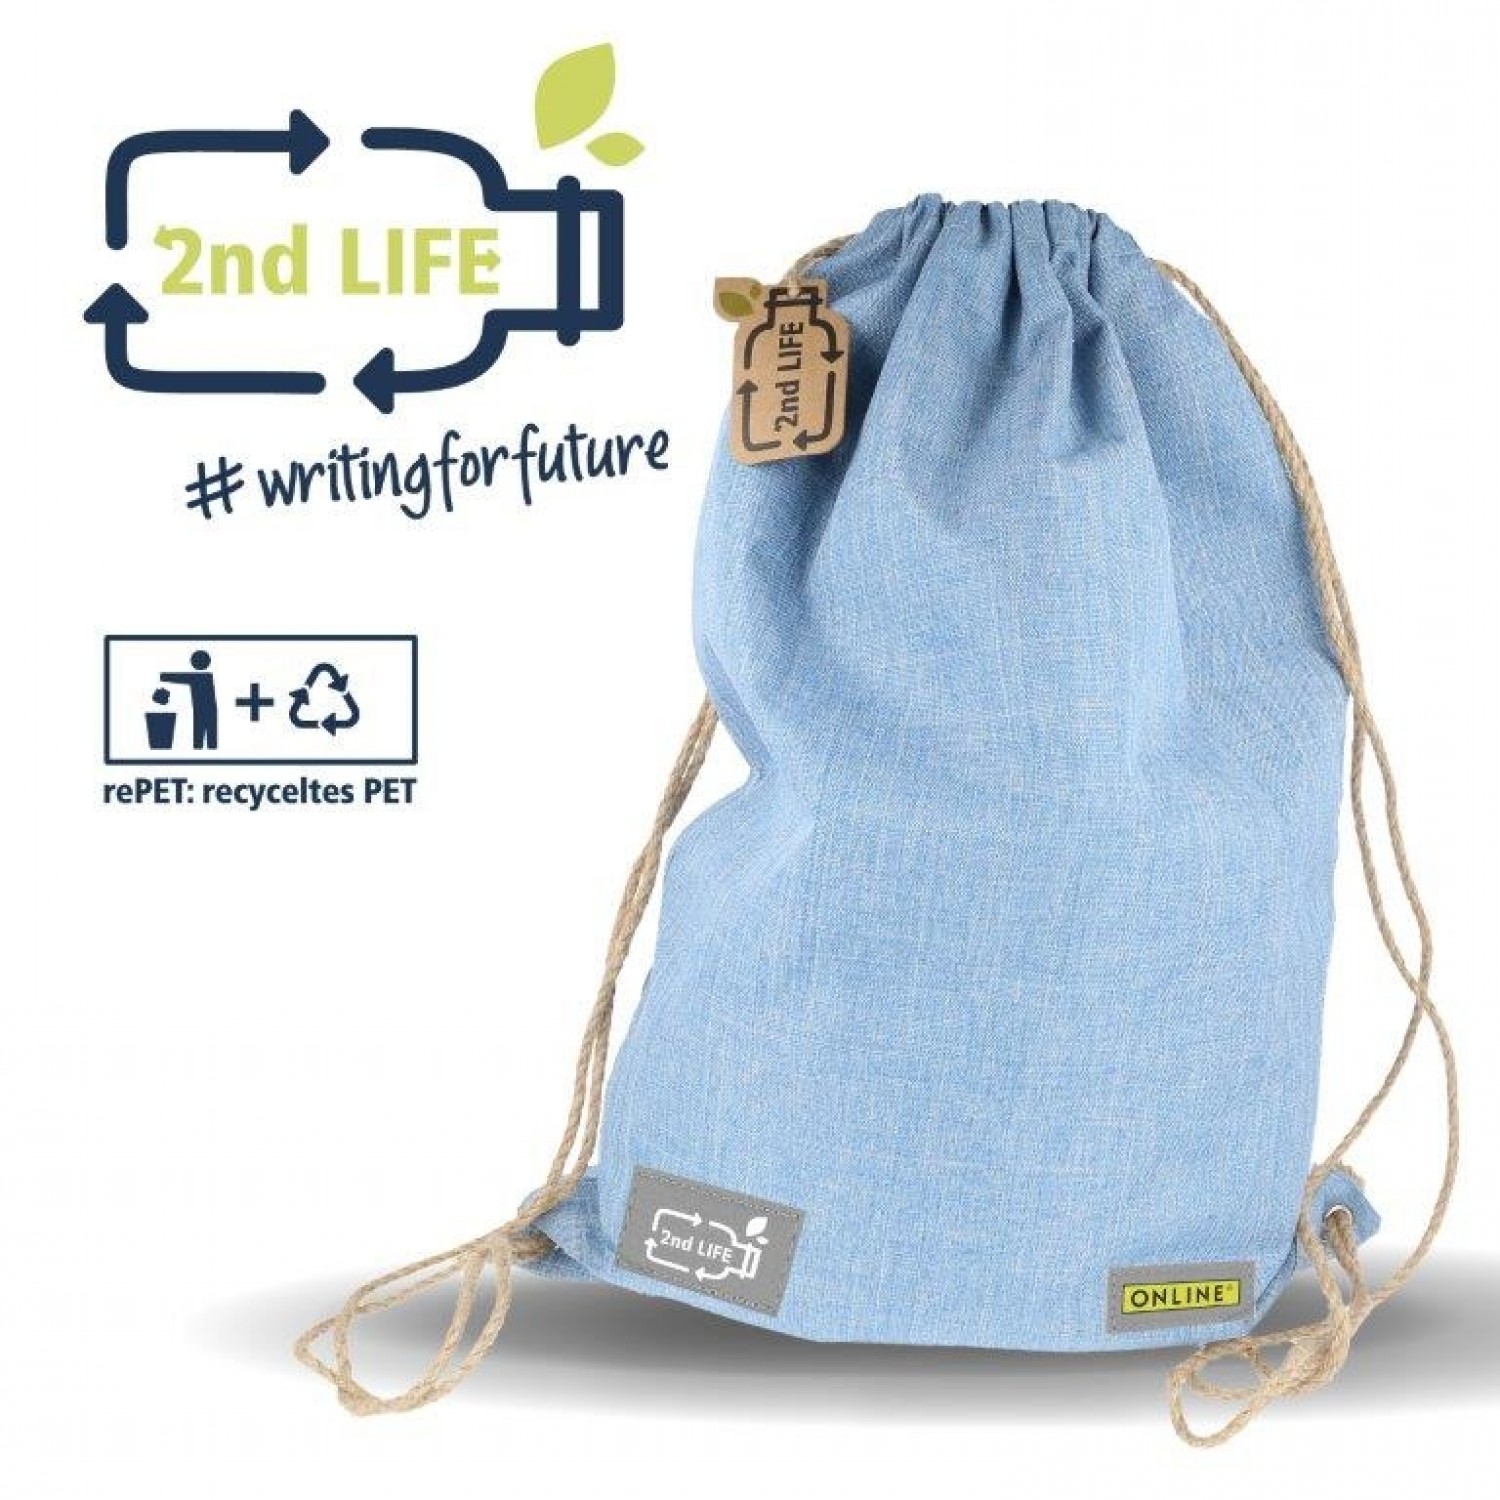 Drawstring 2nd LIFE from recycled PET | Online Pen